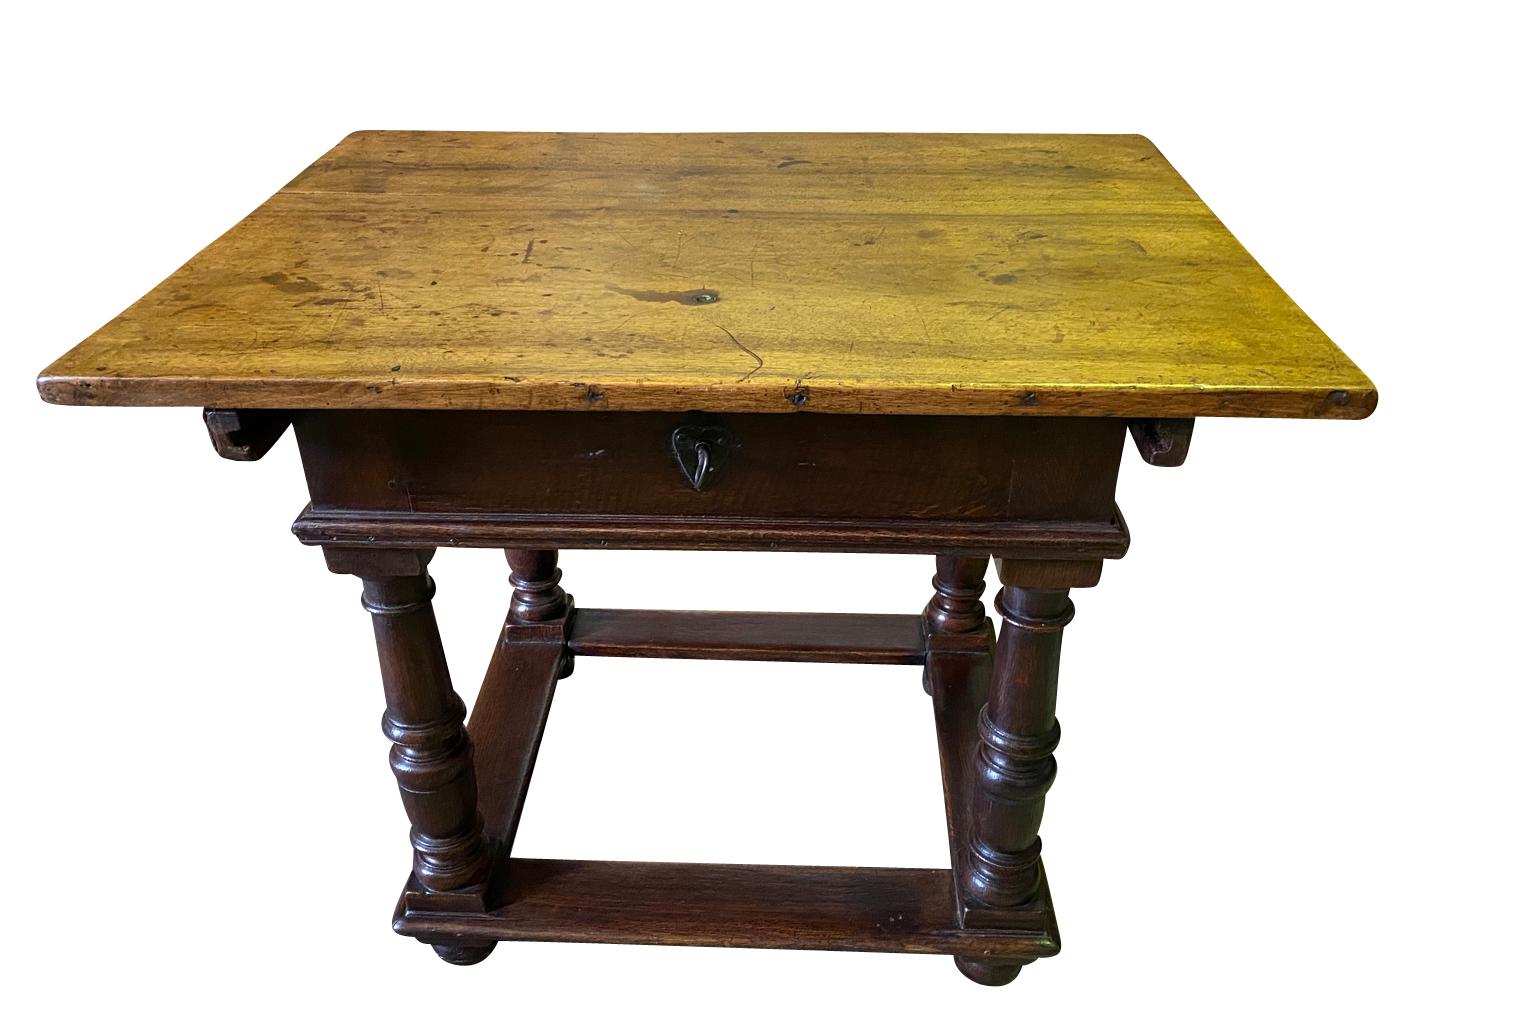 An exceptional 17th century Money Changer's Table from Flanders. Beautifully constructed from walnut and oak. Once unlocked, the top surface slides backwards to expose a configuration of drawers and compartments. The locking mechanism is in itself,